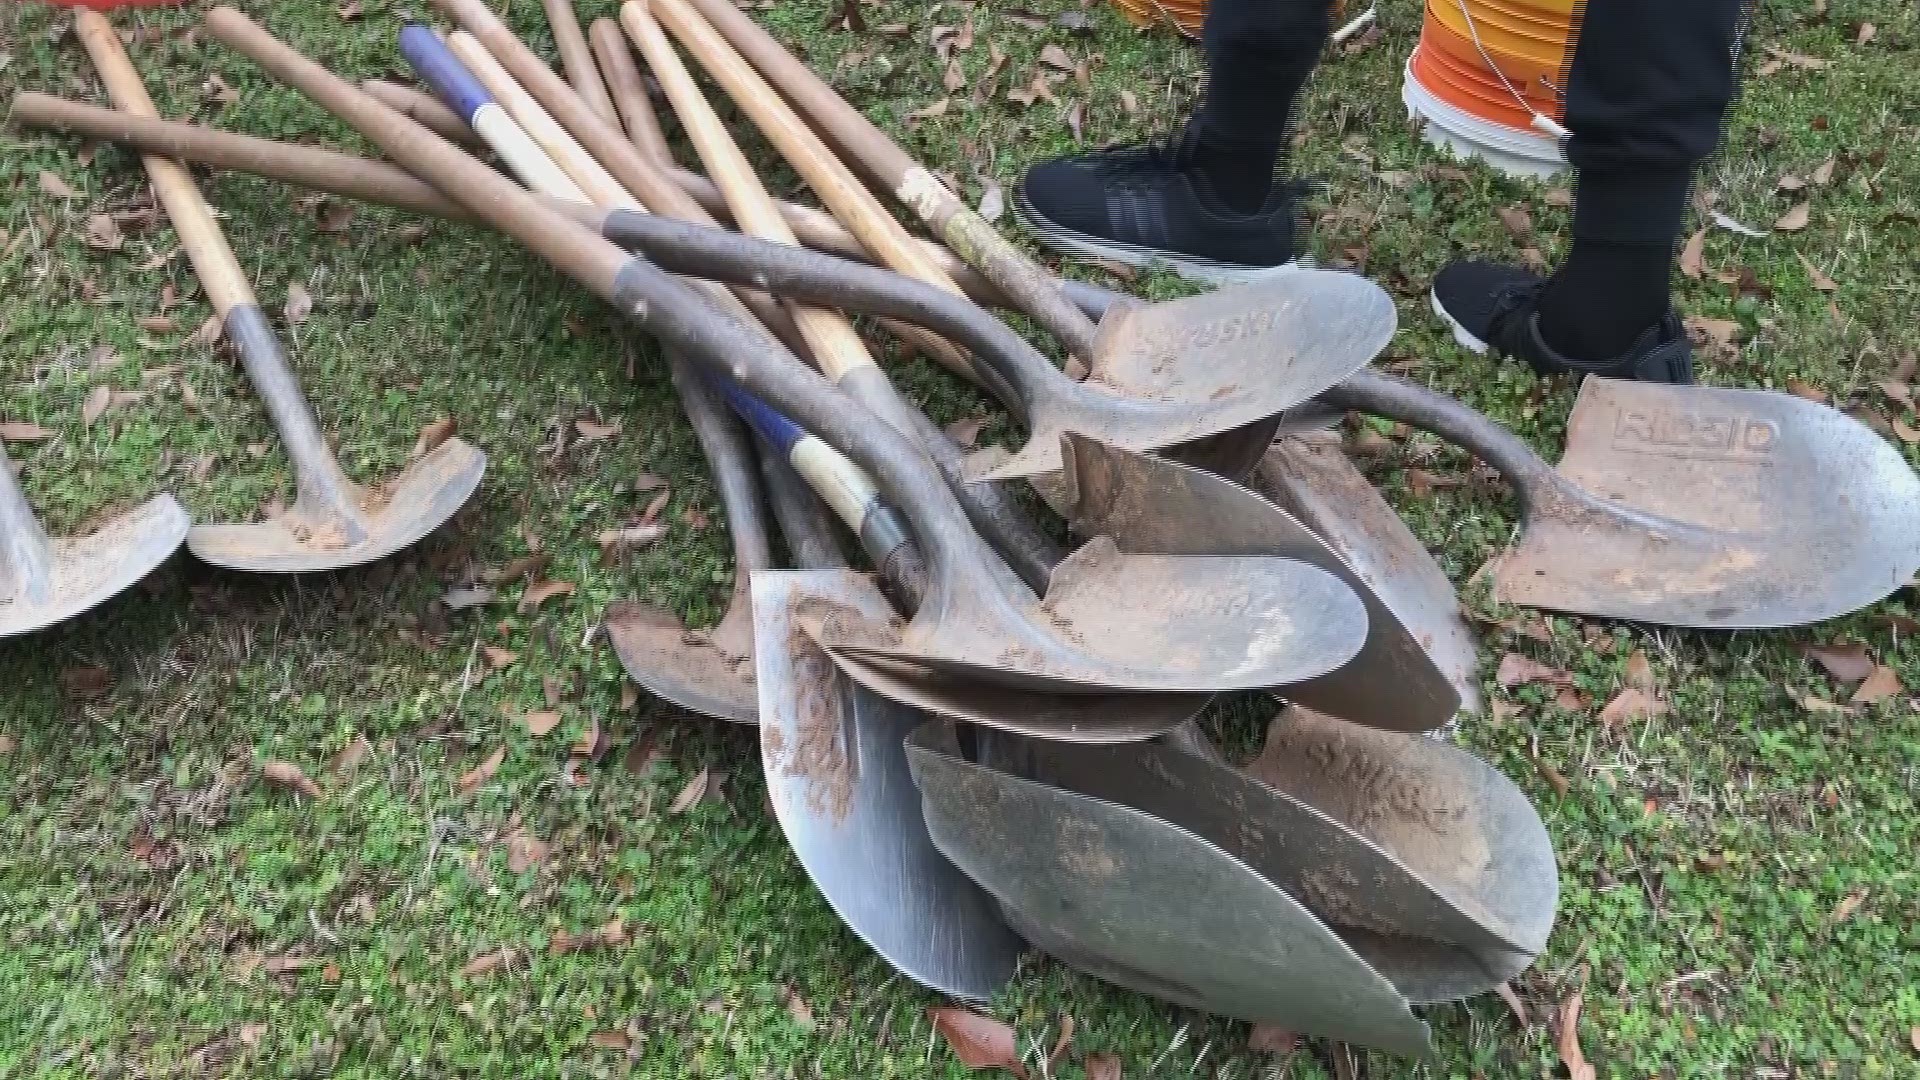 Historical society gets back to its roots with Planting Day